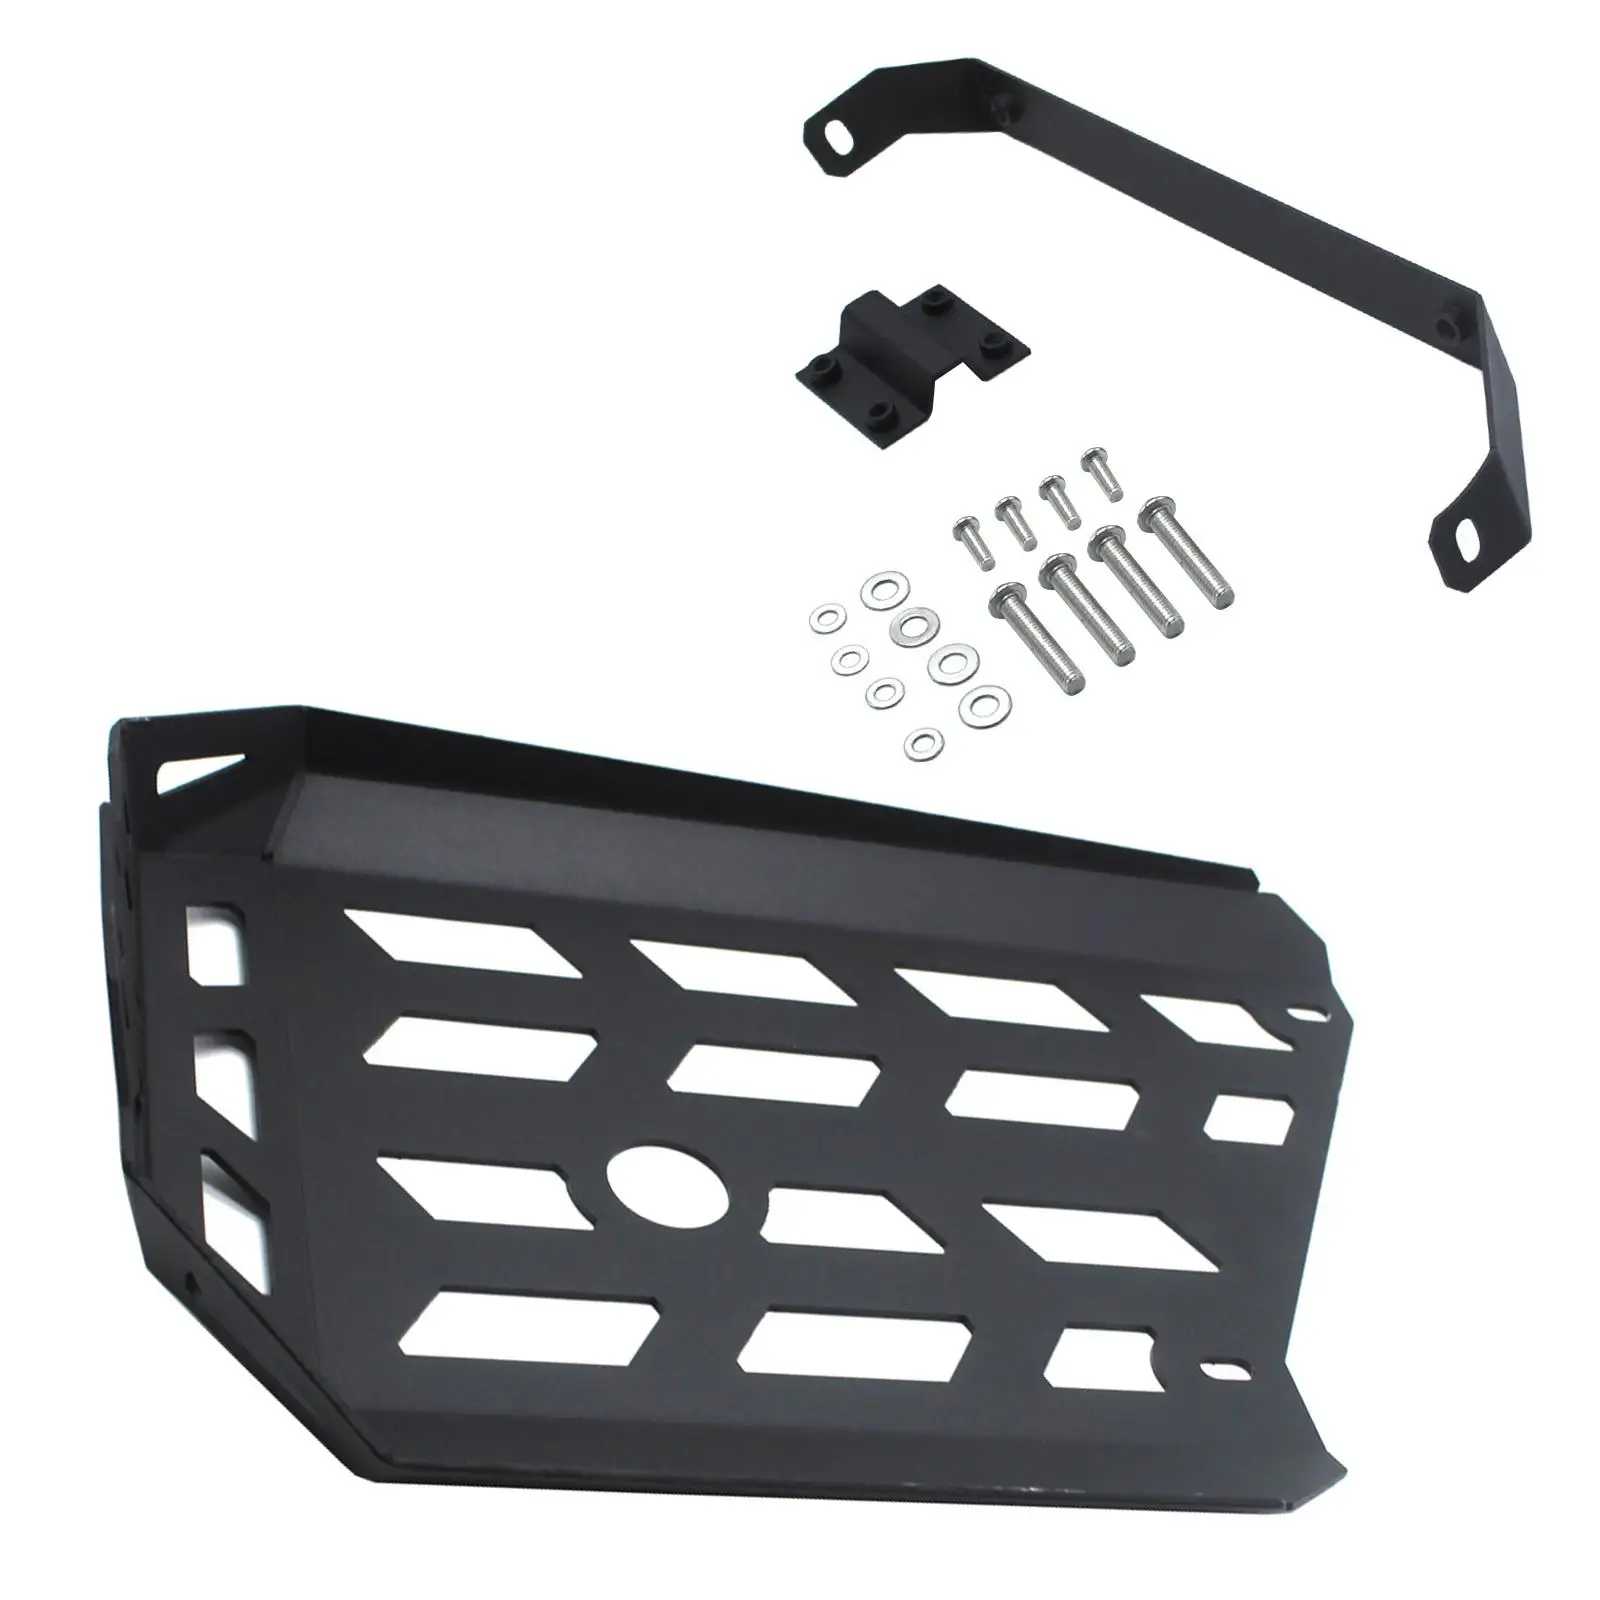 Engine Chassis Guard Cover Protector Skid Board Replacement Belly Pan Protector for for Suzuki V Strom DL1050 XT 2020-2022